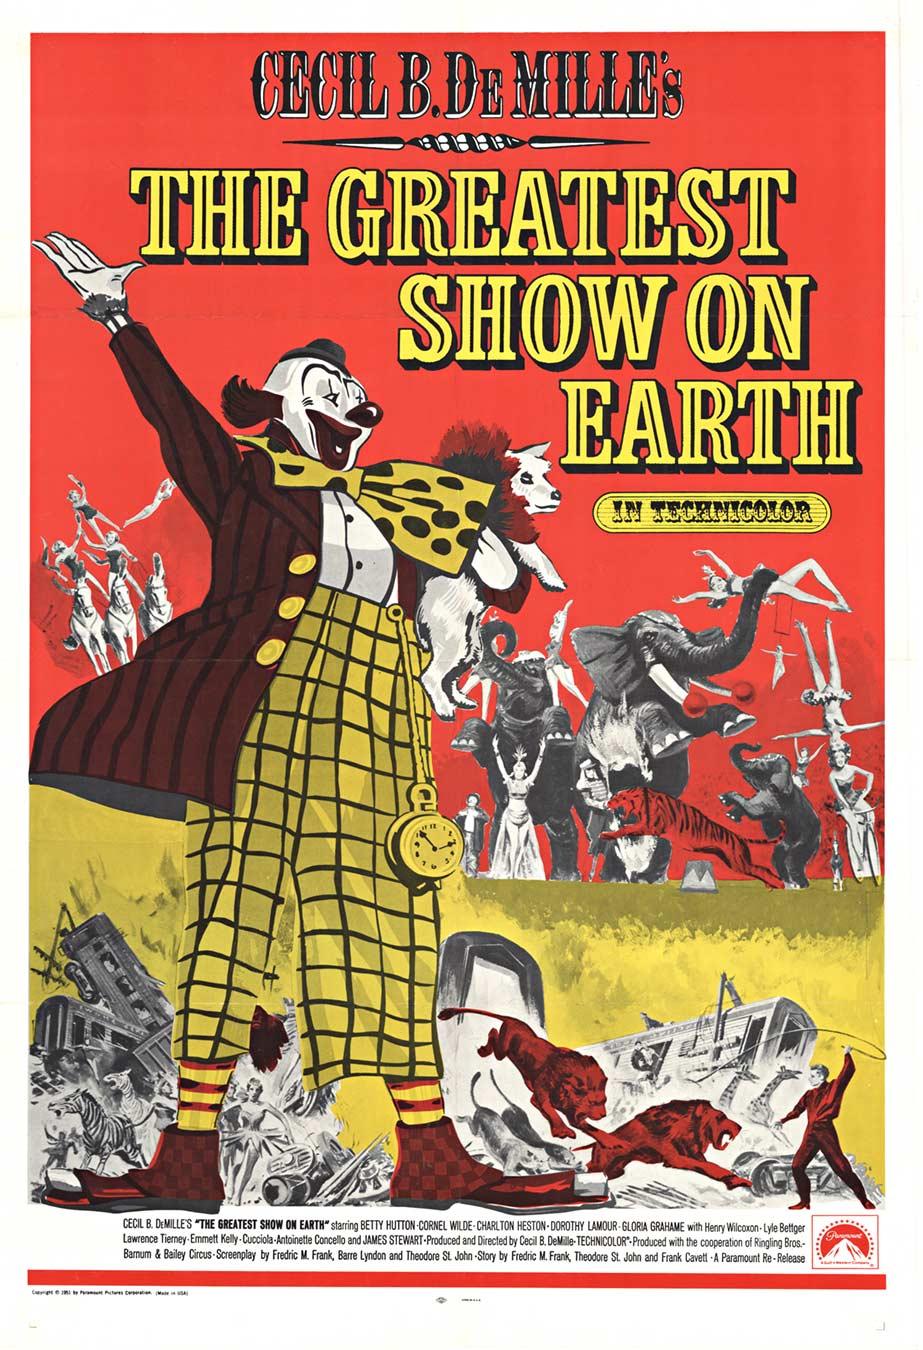 Original "The Greatest Show on Earth" 1951 vintage movie poster US 1-sheet